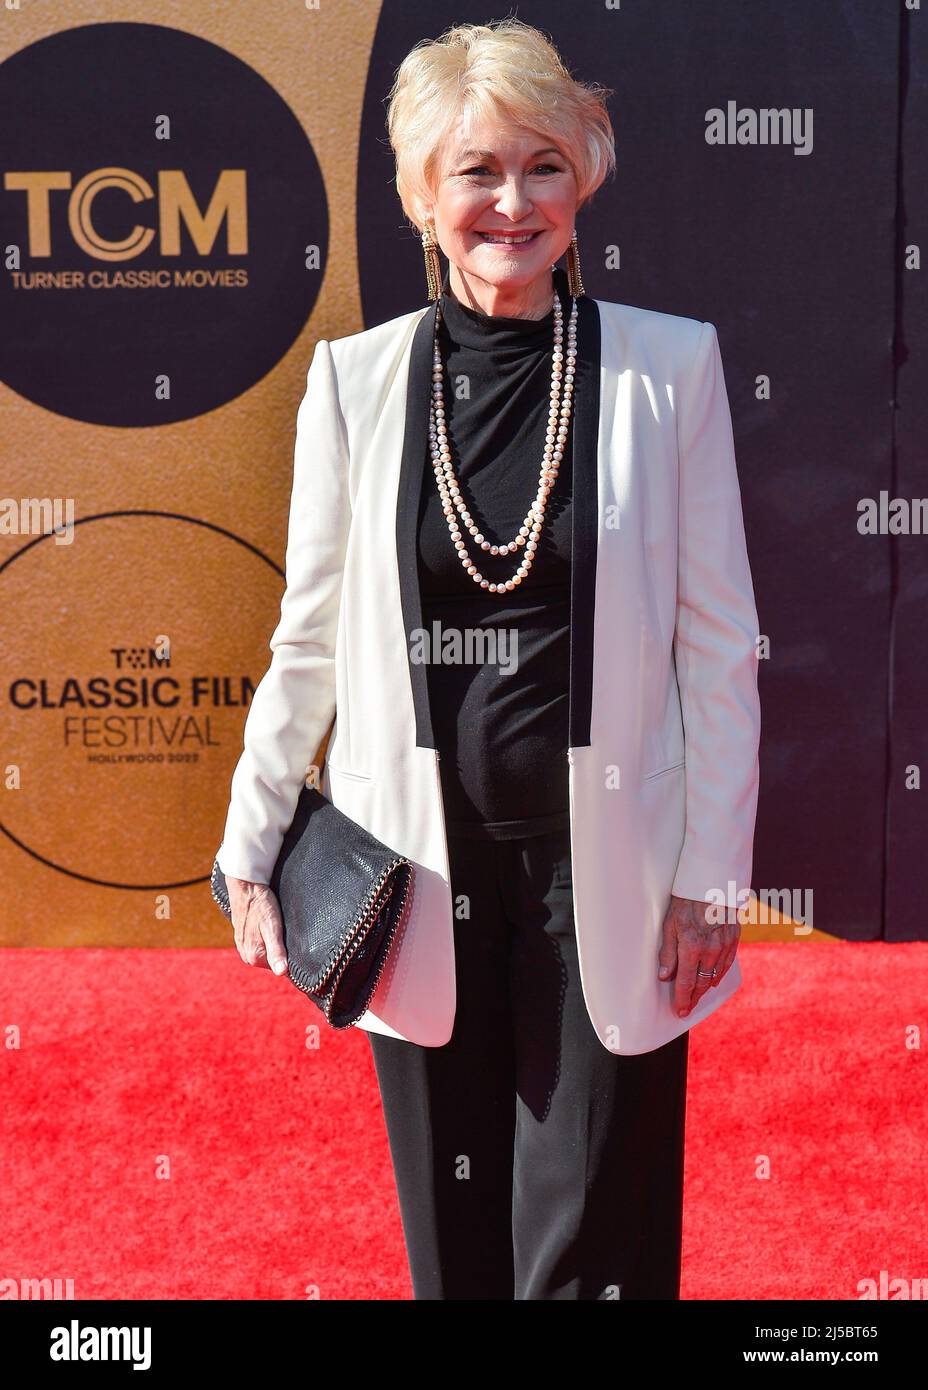 Los Angeles, USA. 21st Apr, 2022. HOLLYWOOD, LOS ANGELES, CALIFORNIA, USA - APRIL 21: American actress Dee Wallace arrives at the 2022 TCM Classic Film Festival Opening Night 40th Anniversary Screening Of 'E.T. The Extra-Terrestrial' held at the TCL Chinese Theatre IMAX on April 21, 2022 in Hollywood, Los Angeles, California, United States. (Photo by Image Press Agency) Credit: Image Press Agency/Alamy Live News Stock Photo